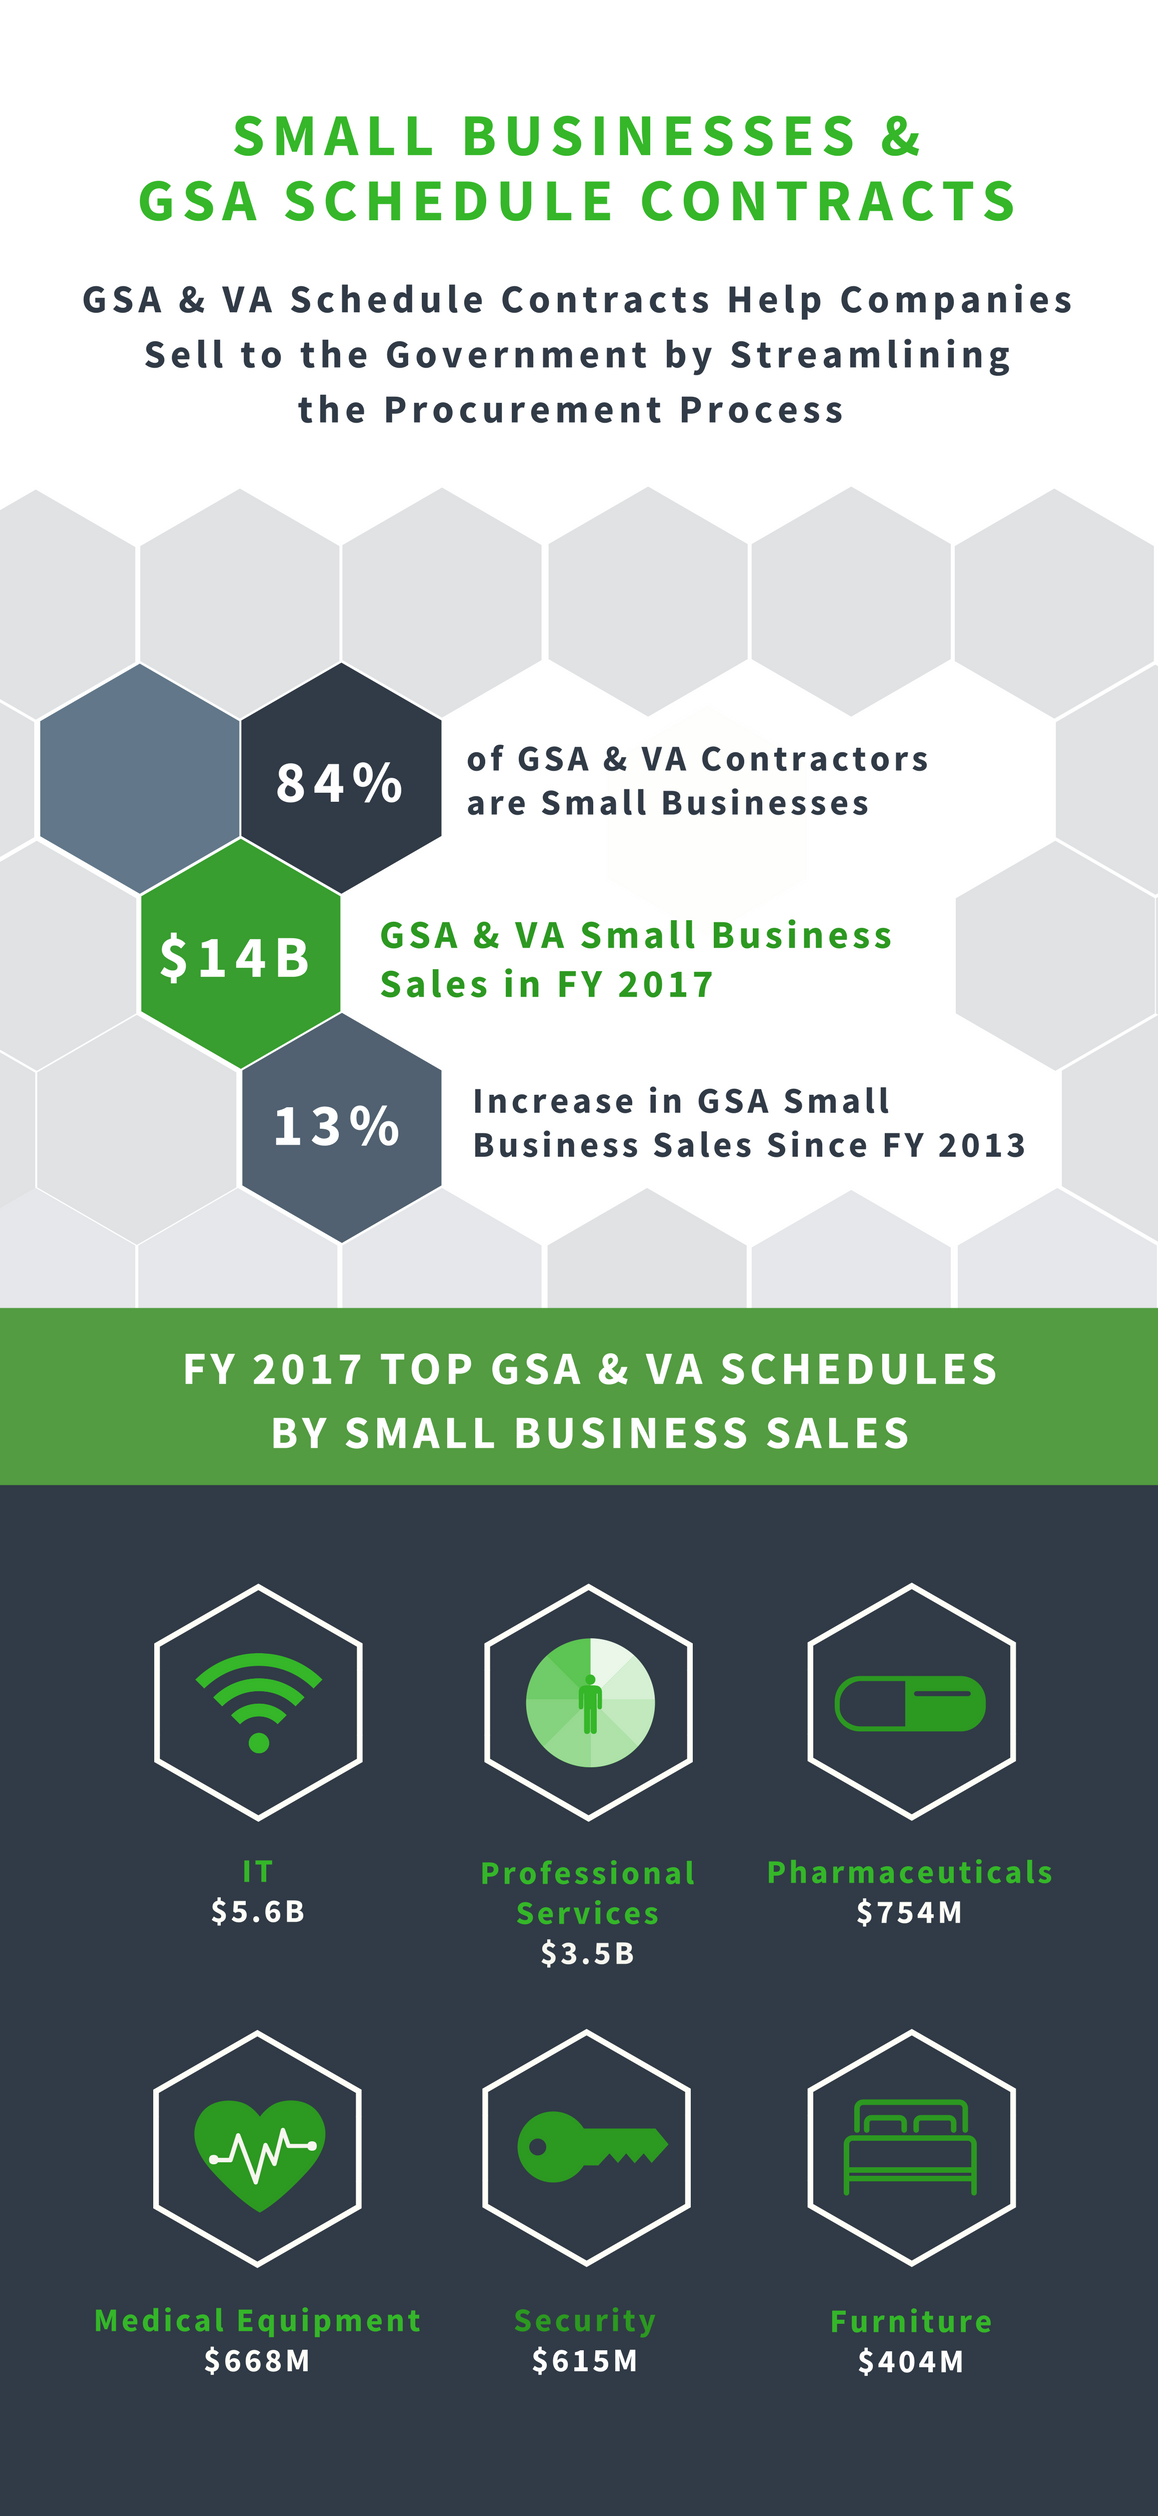 GSA Schedules Sales to Small Businesses in FY 2017